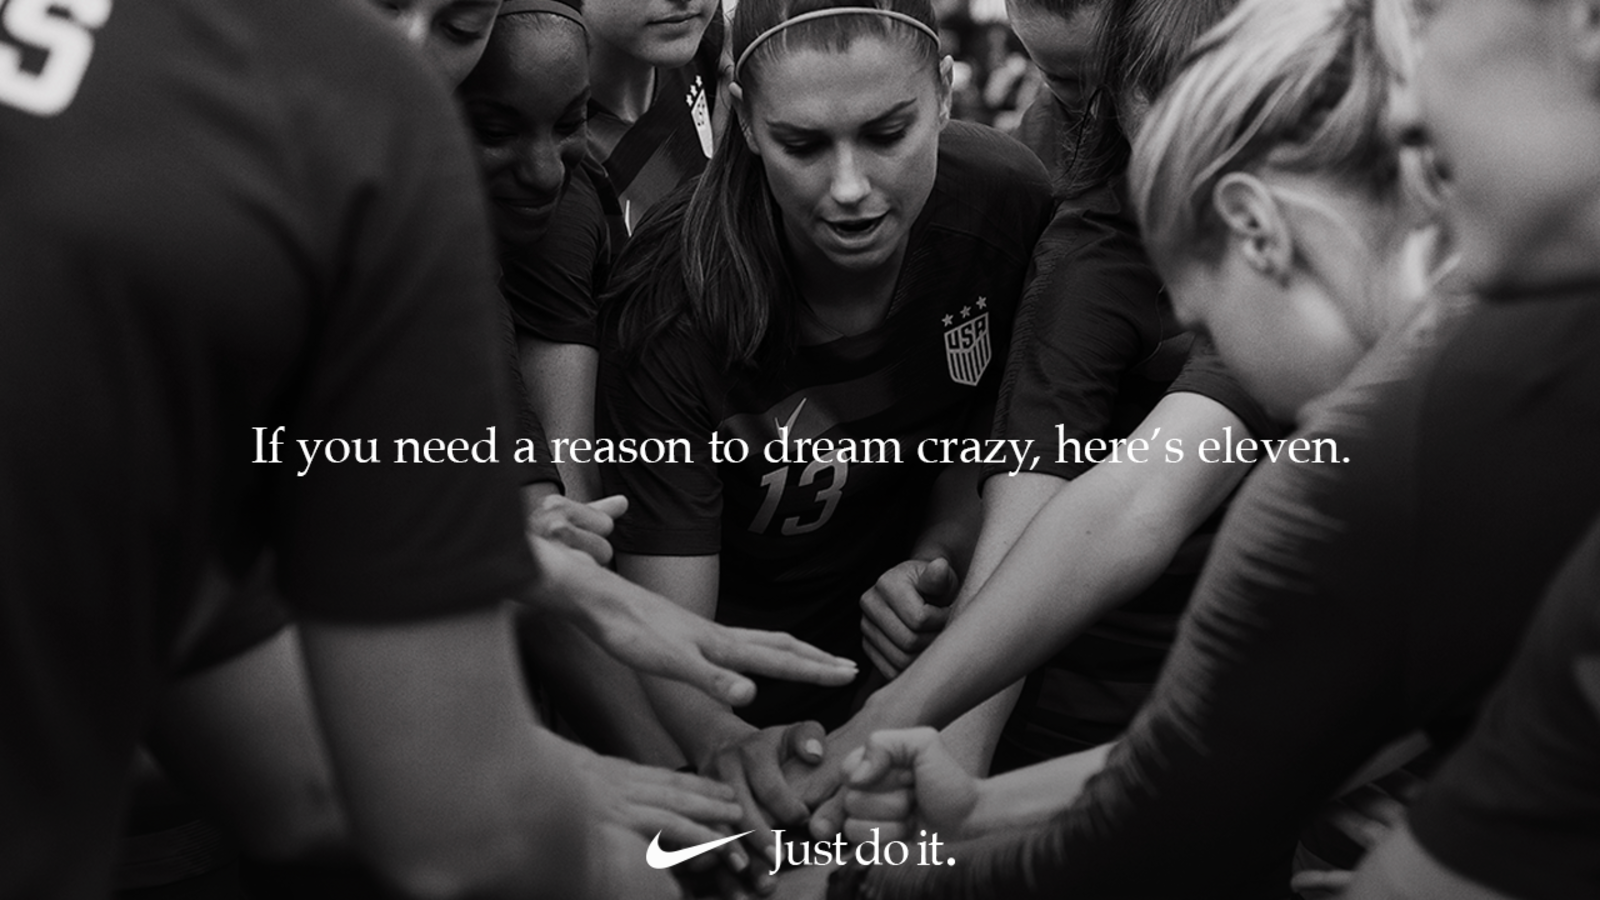 nike it's only crazy